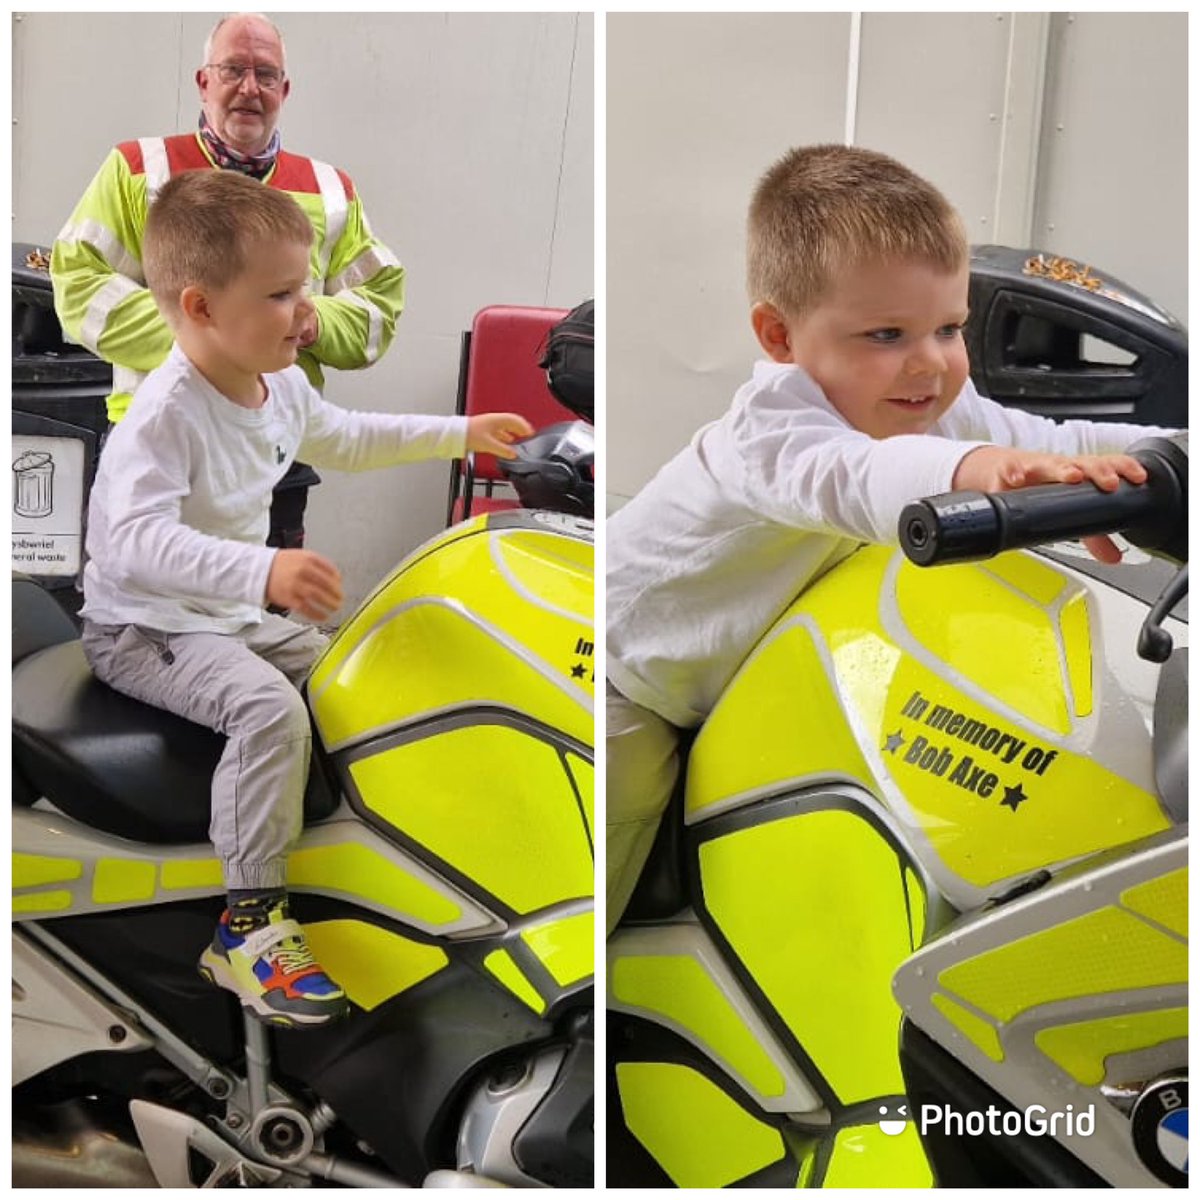 Jasper met rider Nigel when he was on a scheduled run at a local hospital. He loved Bob the bike and will be telling everyone in school about it tomorrow. #BobandJasperbonding #Thebestschoolstoryever